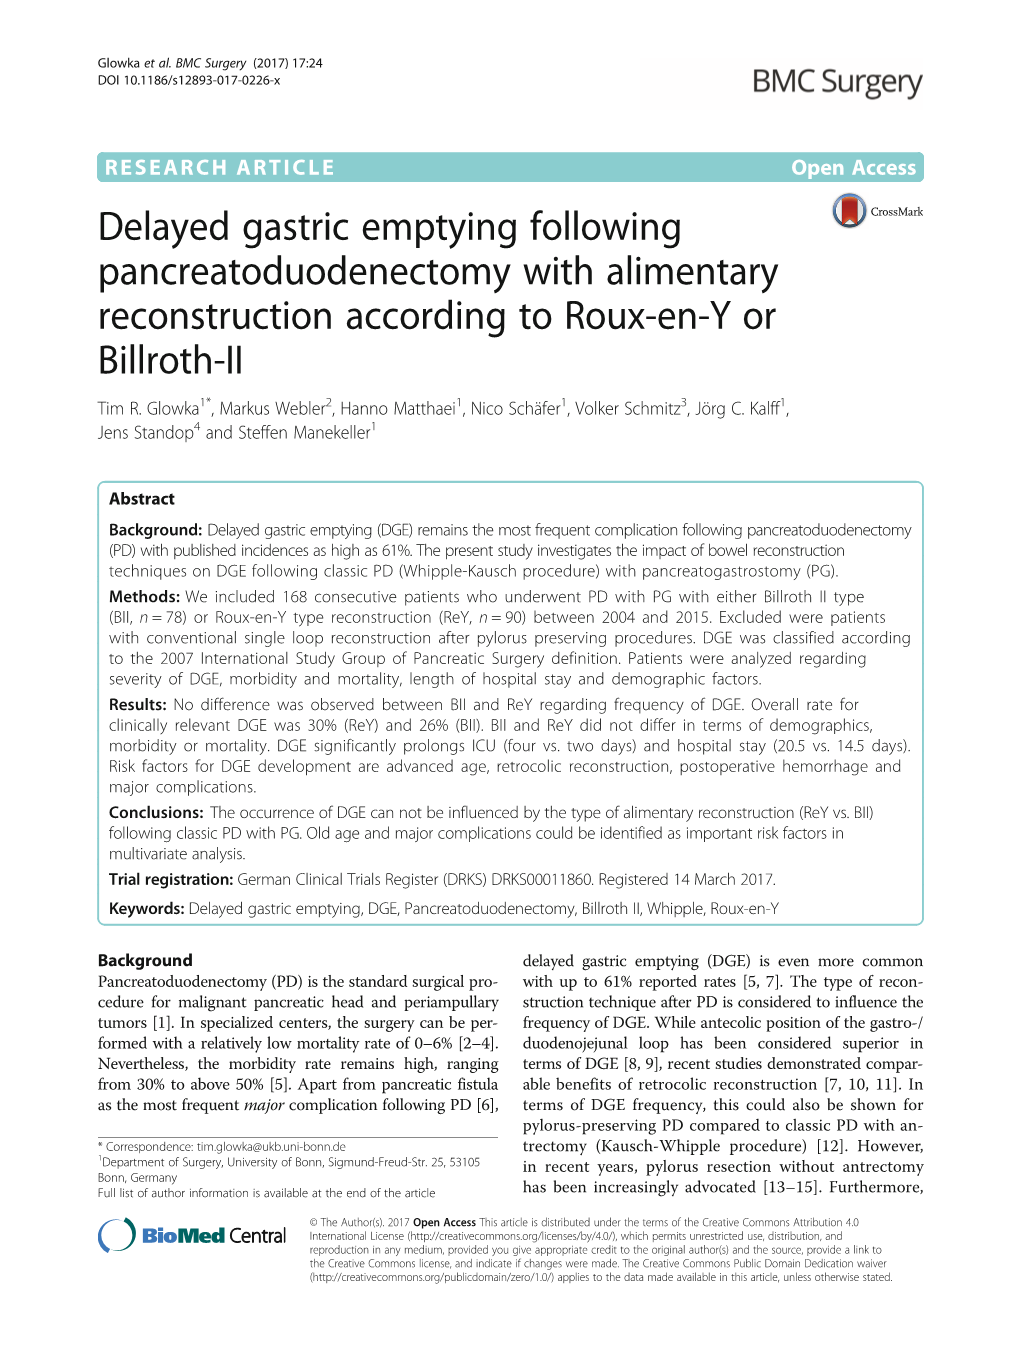 Delayed Gastric Emptying Following Pancreatoduodenectomy with Alimentary Reconstruction According to Roux-En-Y Or Billroth-II Tim R